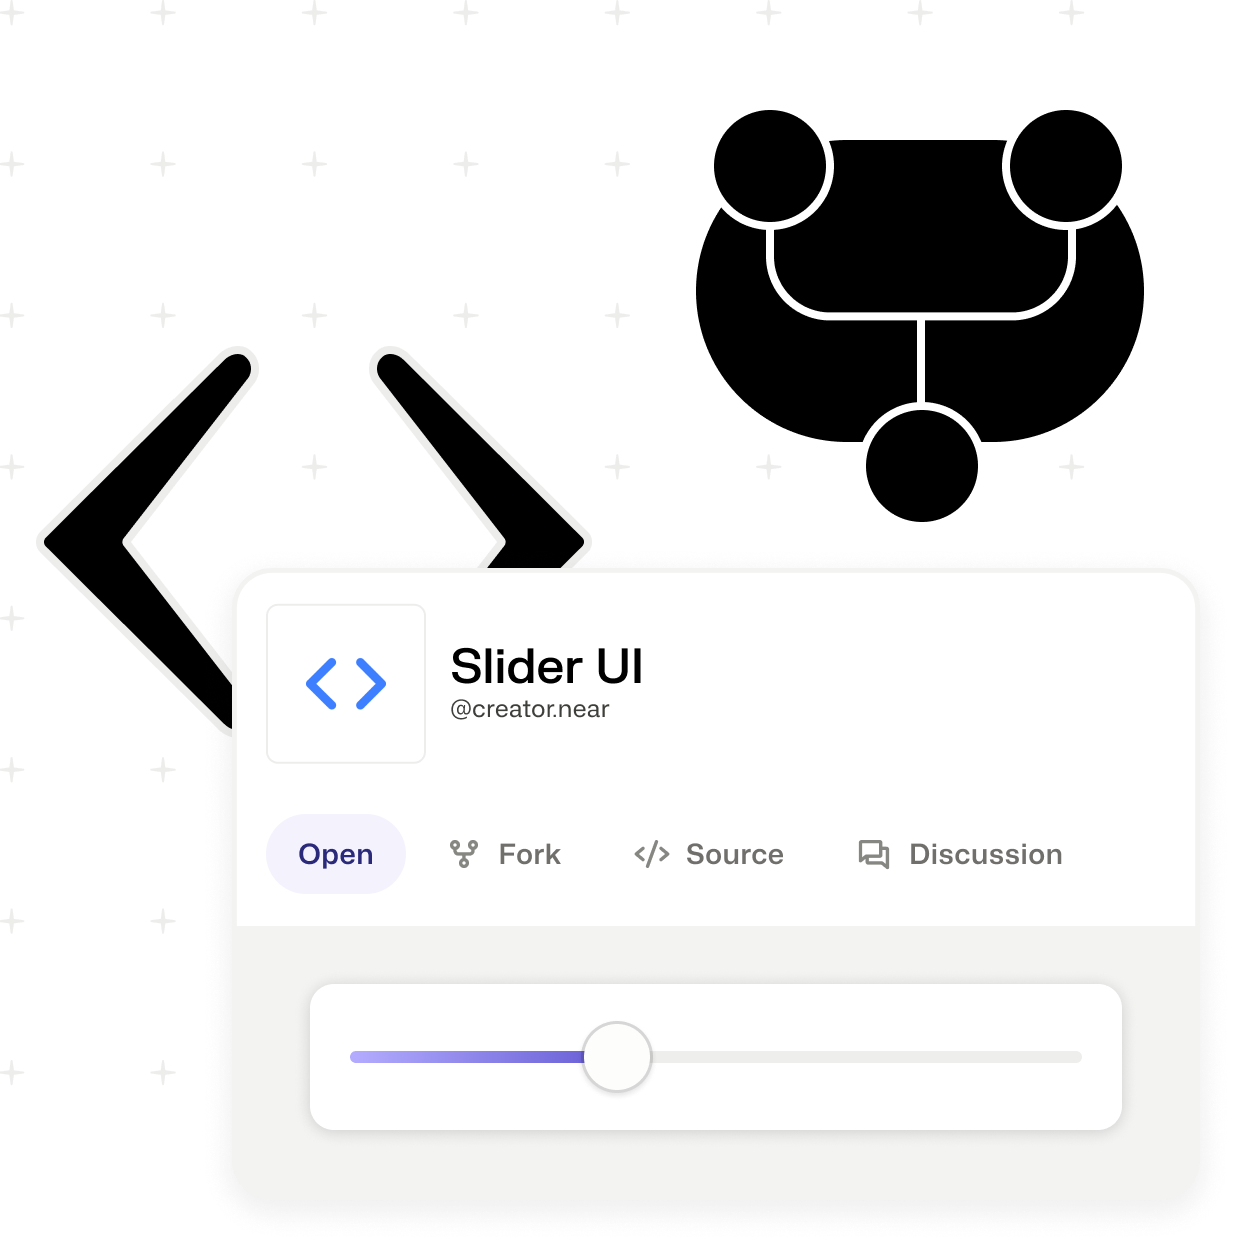 Illustration of the UI listing of an application with buttons to open, fork, view source, or discuss. Behind it there are images of code brackets and a git-fork icon. 